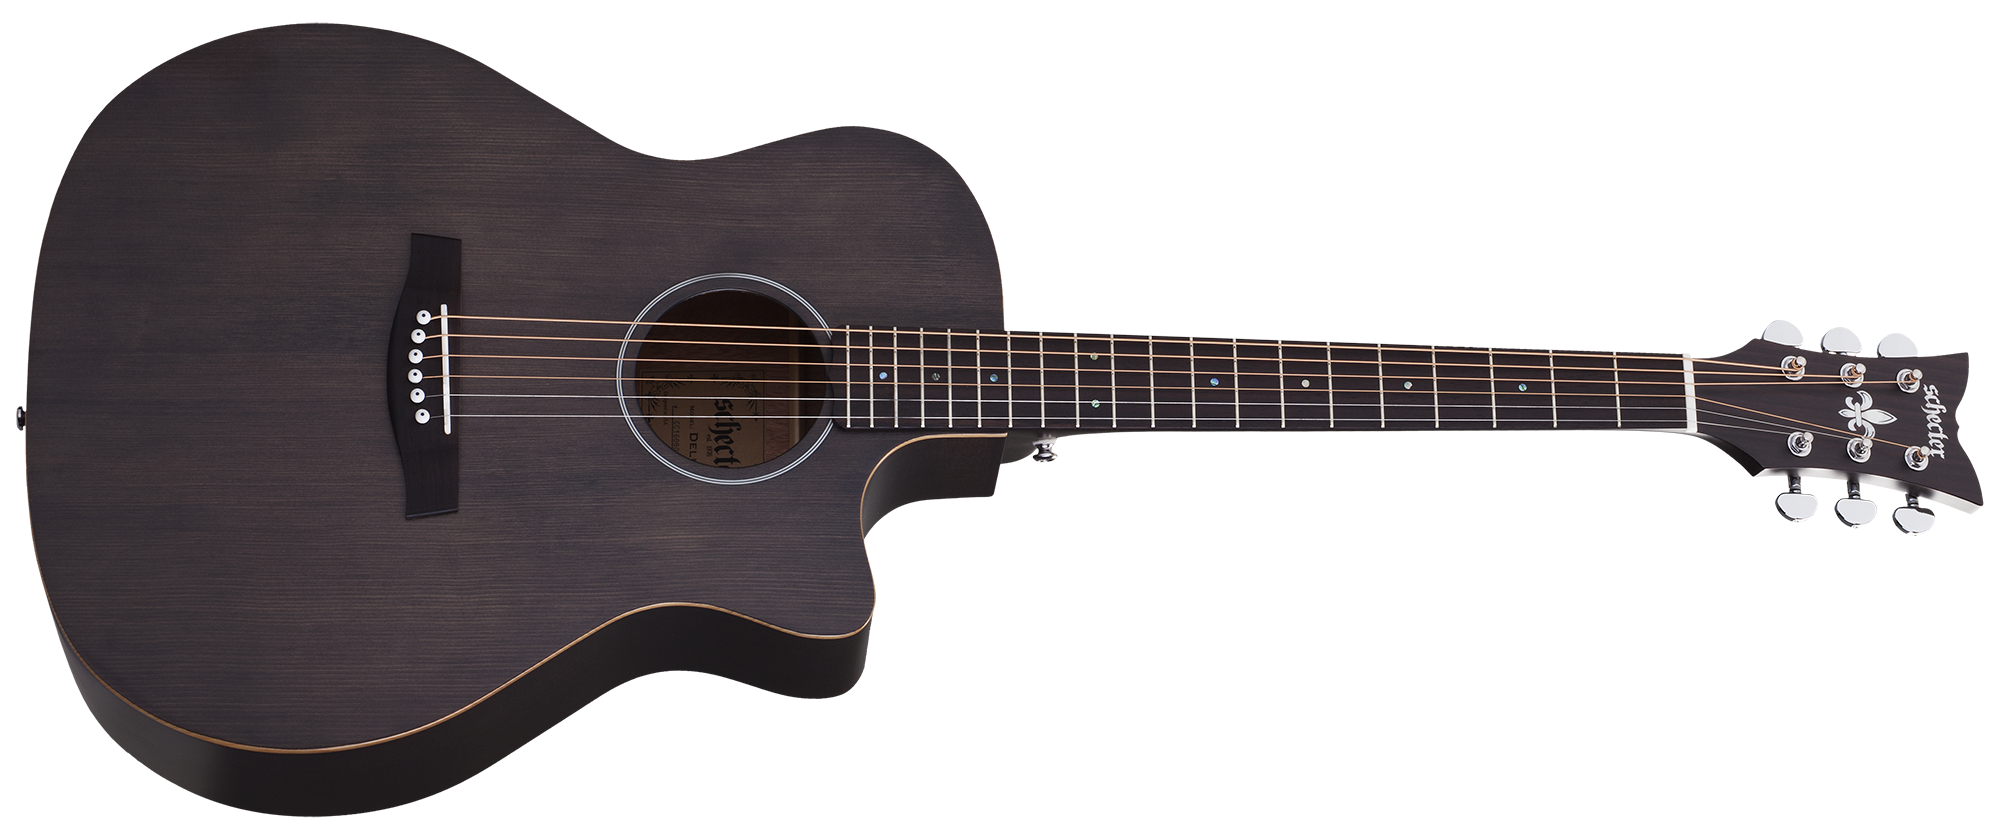 Deluxe Acoustic